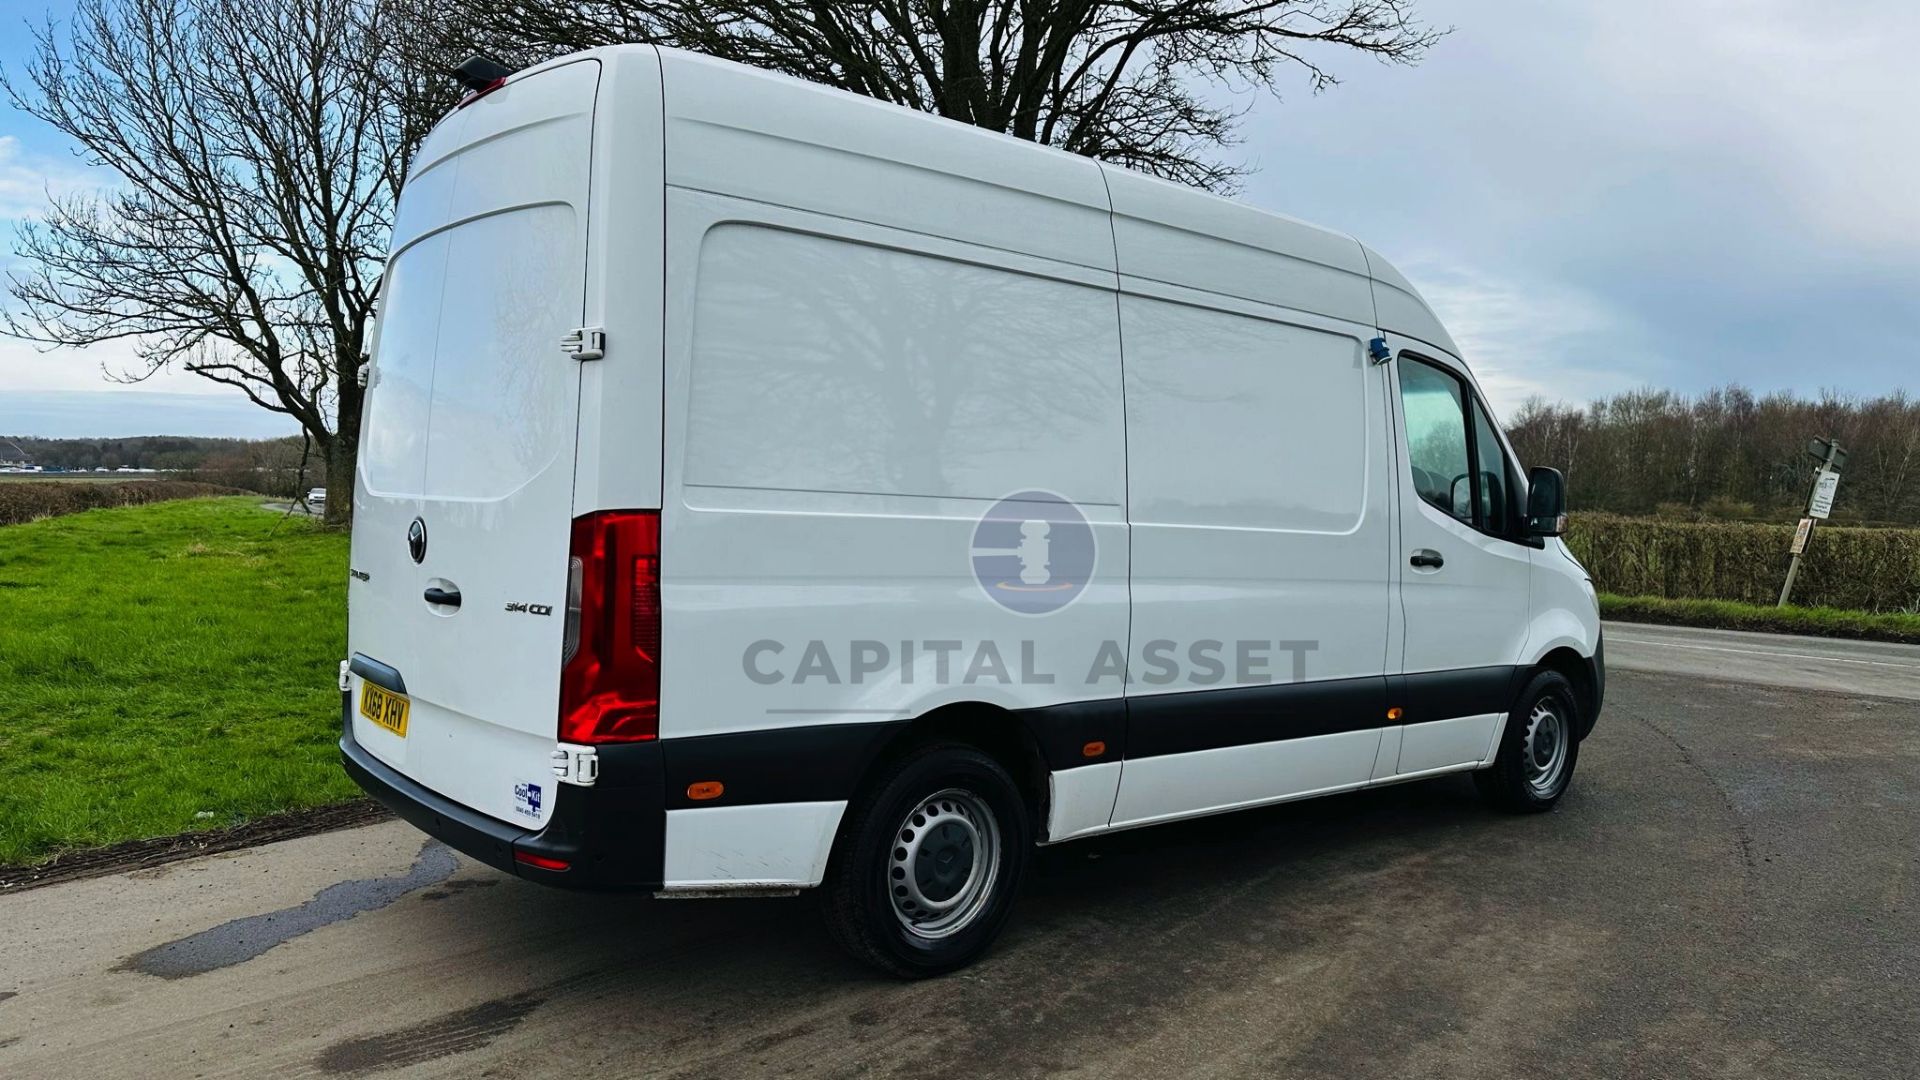 MERCEDES-BENZ SPRINTER 314 CDI *MWB - REFRIGERATED VAN* (2019 - FACELIFT MODEL) *OVERNIGHT STANDBY* - Image 14 of 41